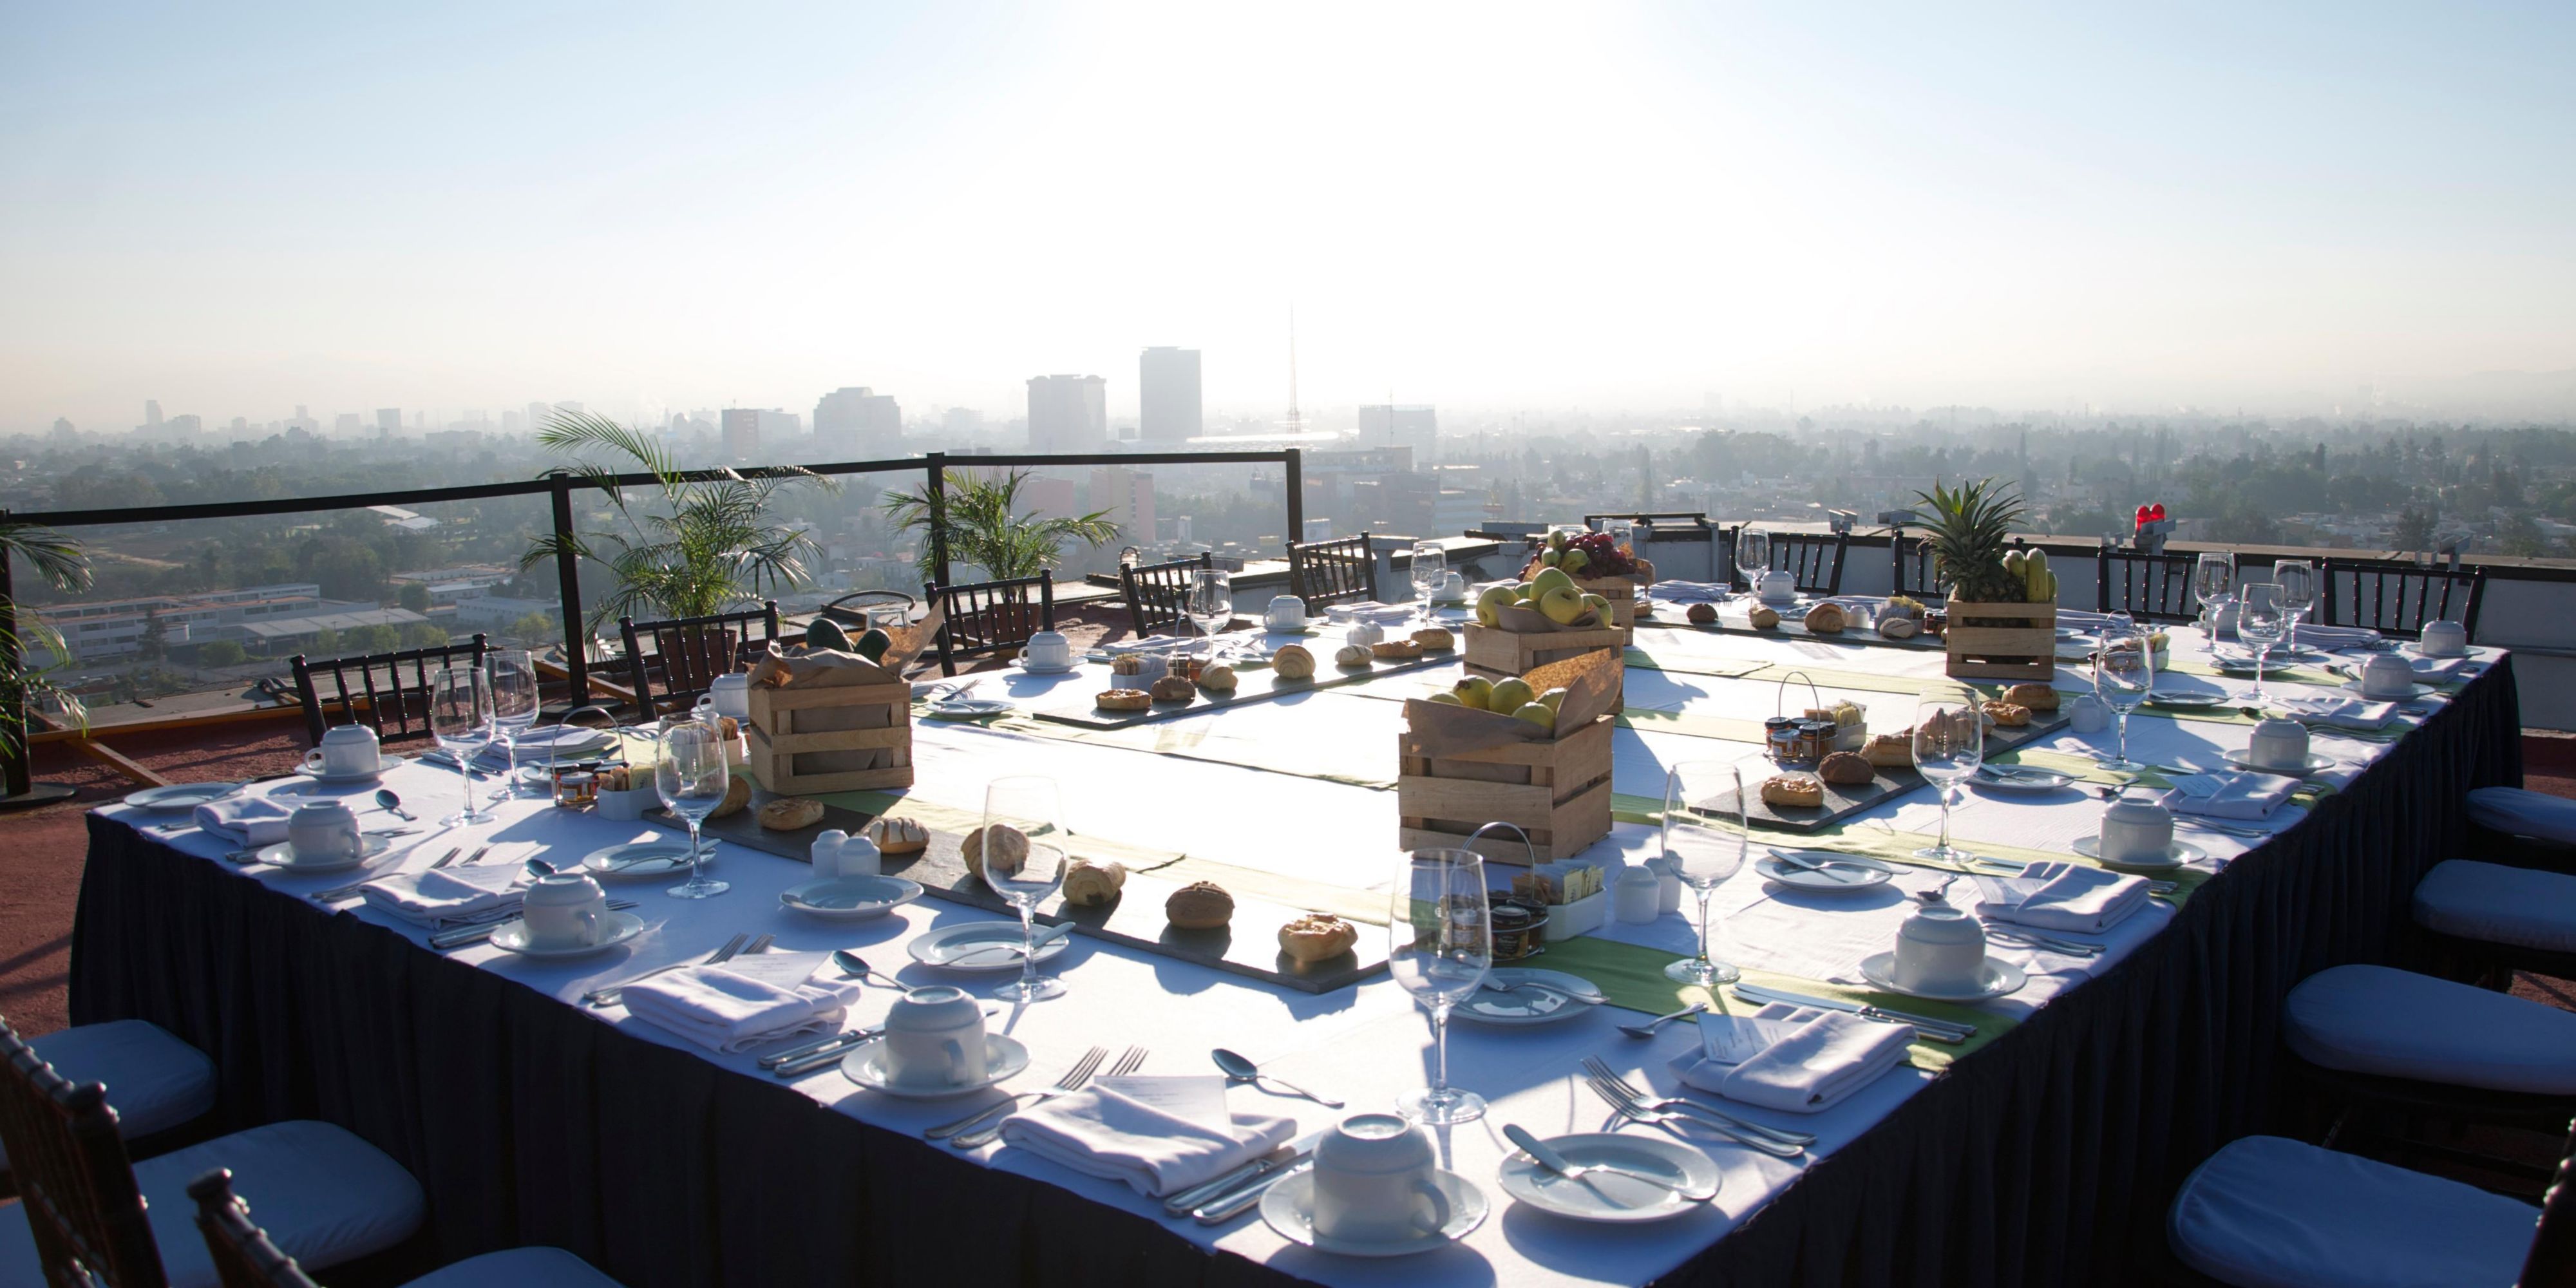 Breakfast at Helipad
Chef Table 
Cooking classes
Romantic Dinners at Helipad